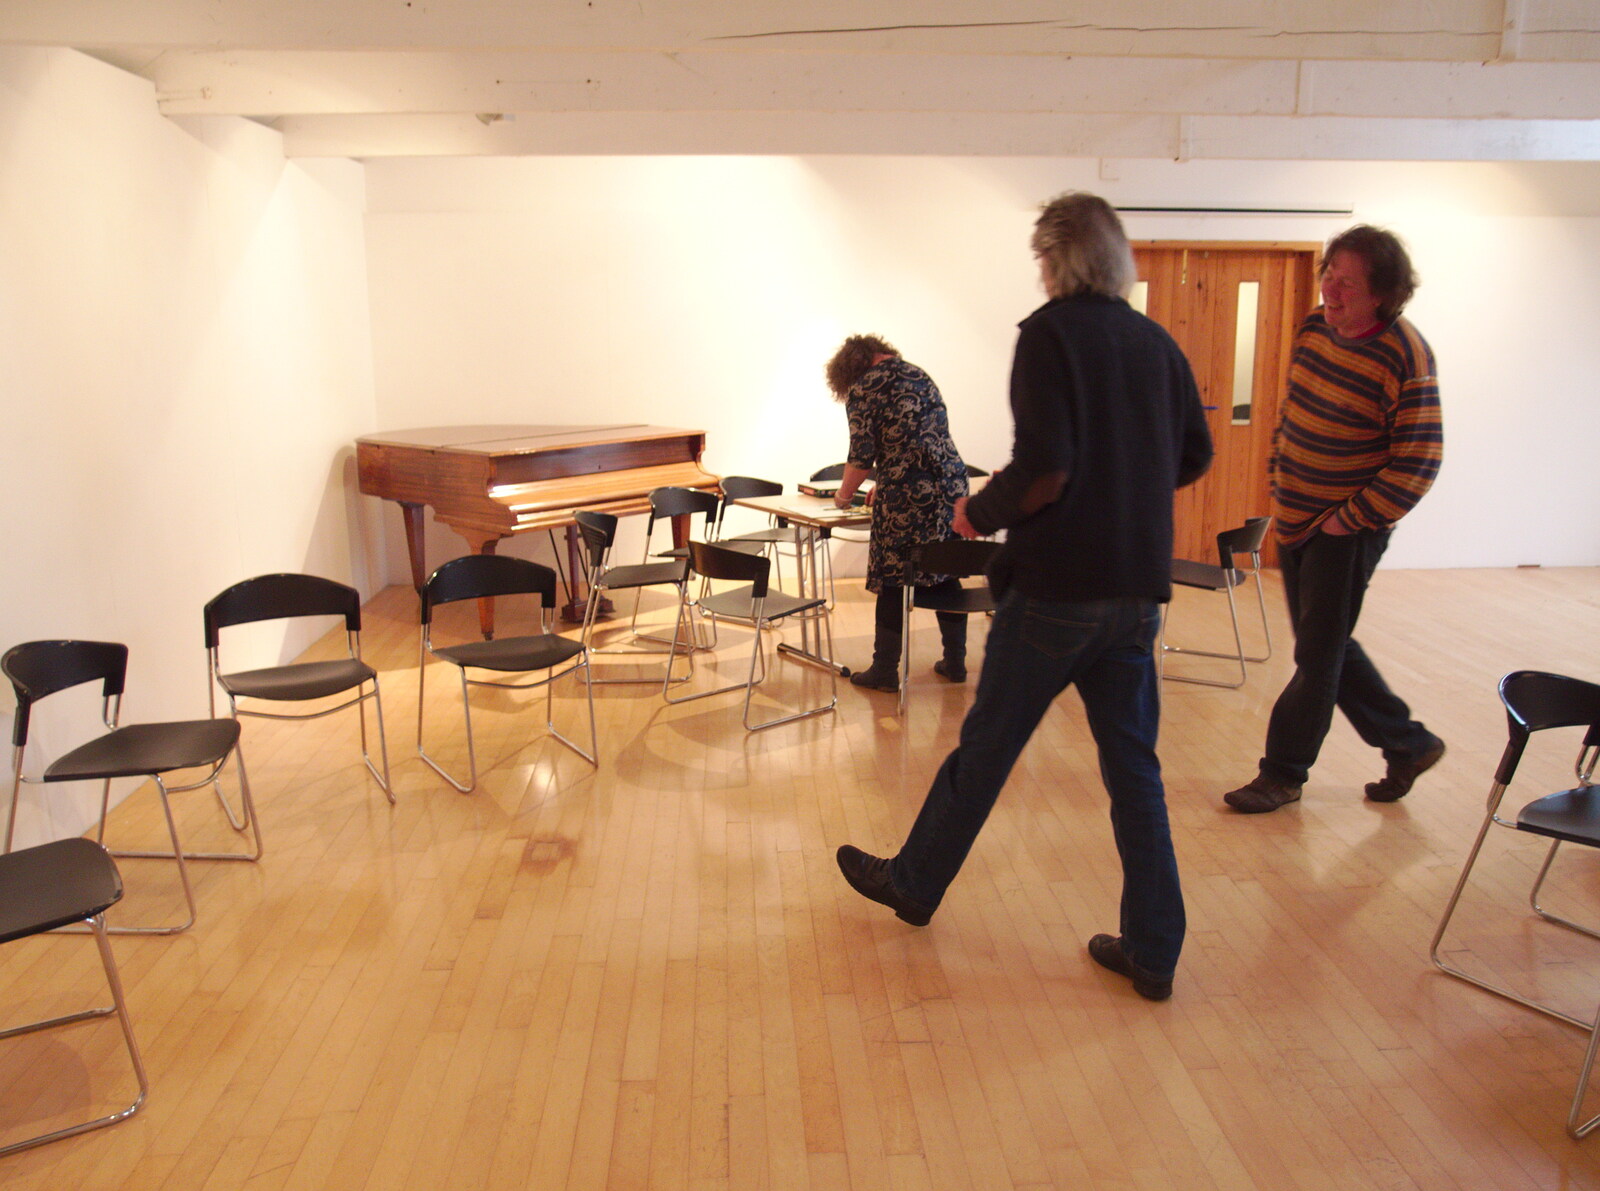 Rob strides around in the music room from The BBs Play Scrabble at Wingfield Barns, Wingfield, Suffolk - 24th May 2014